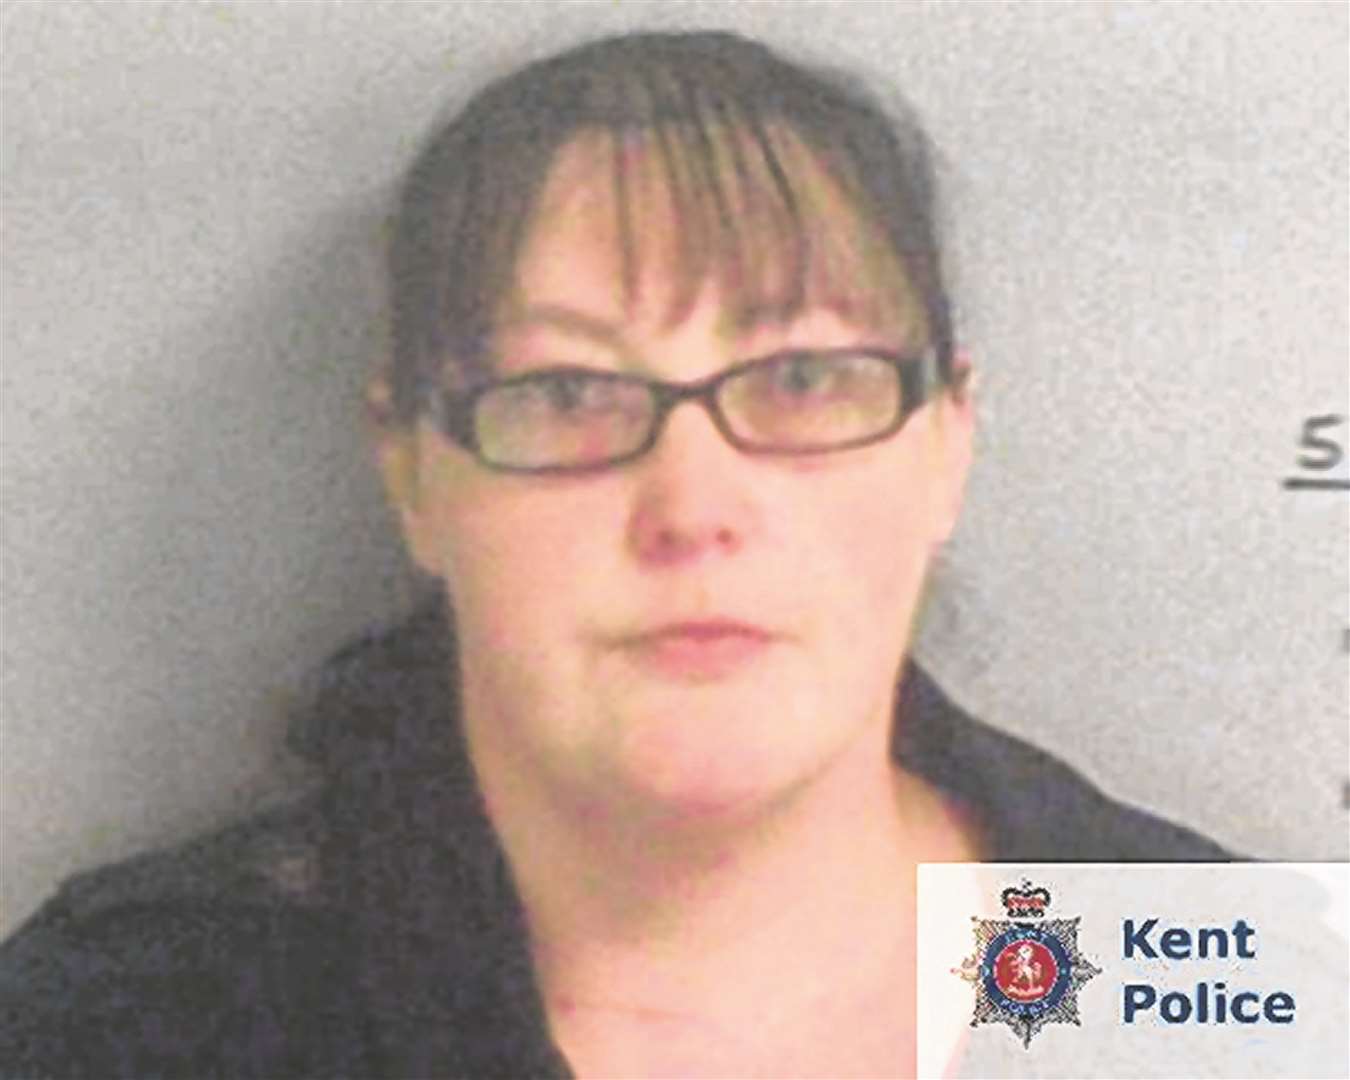 Donna Hartshorne has been jailed for stealing more than £100,000 from the company she worked for